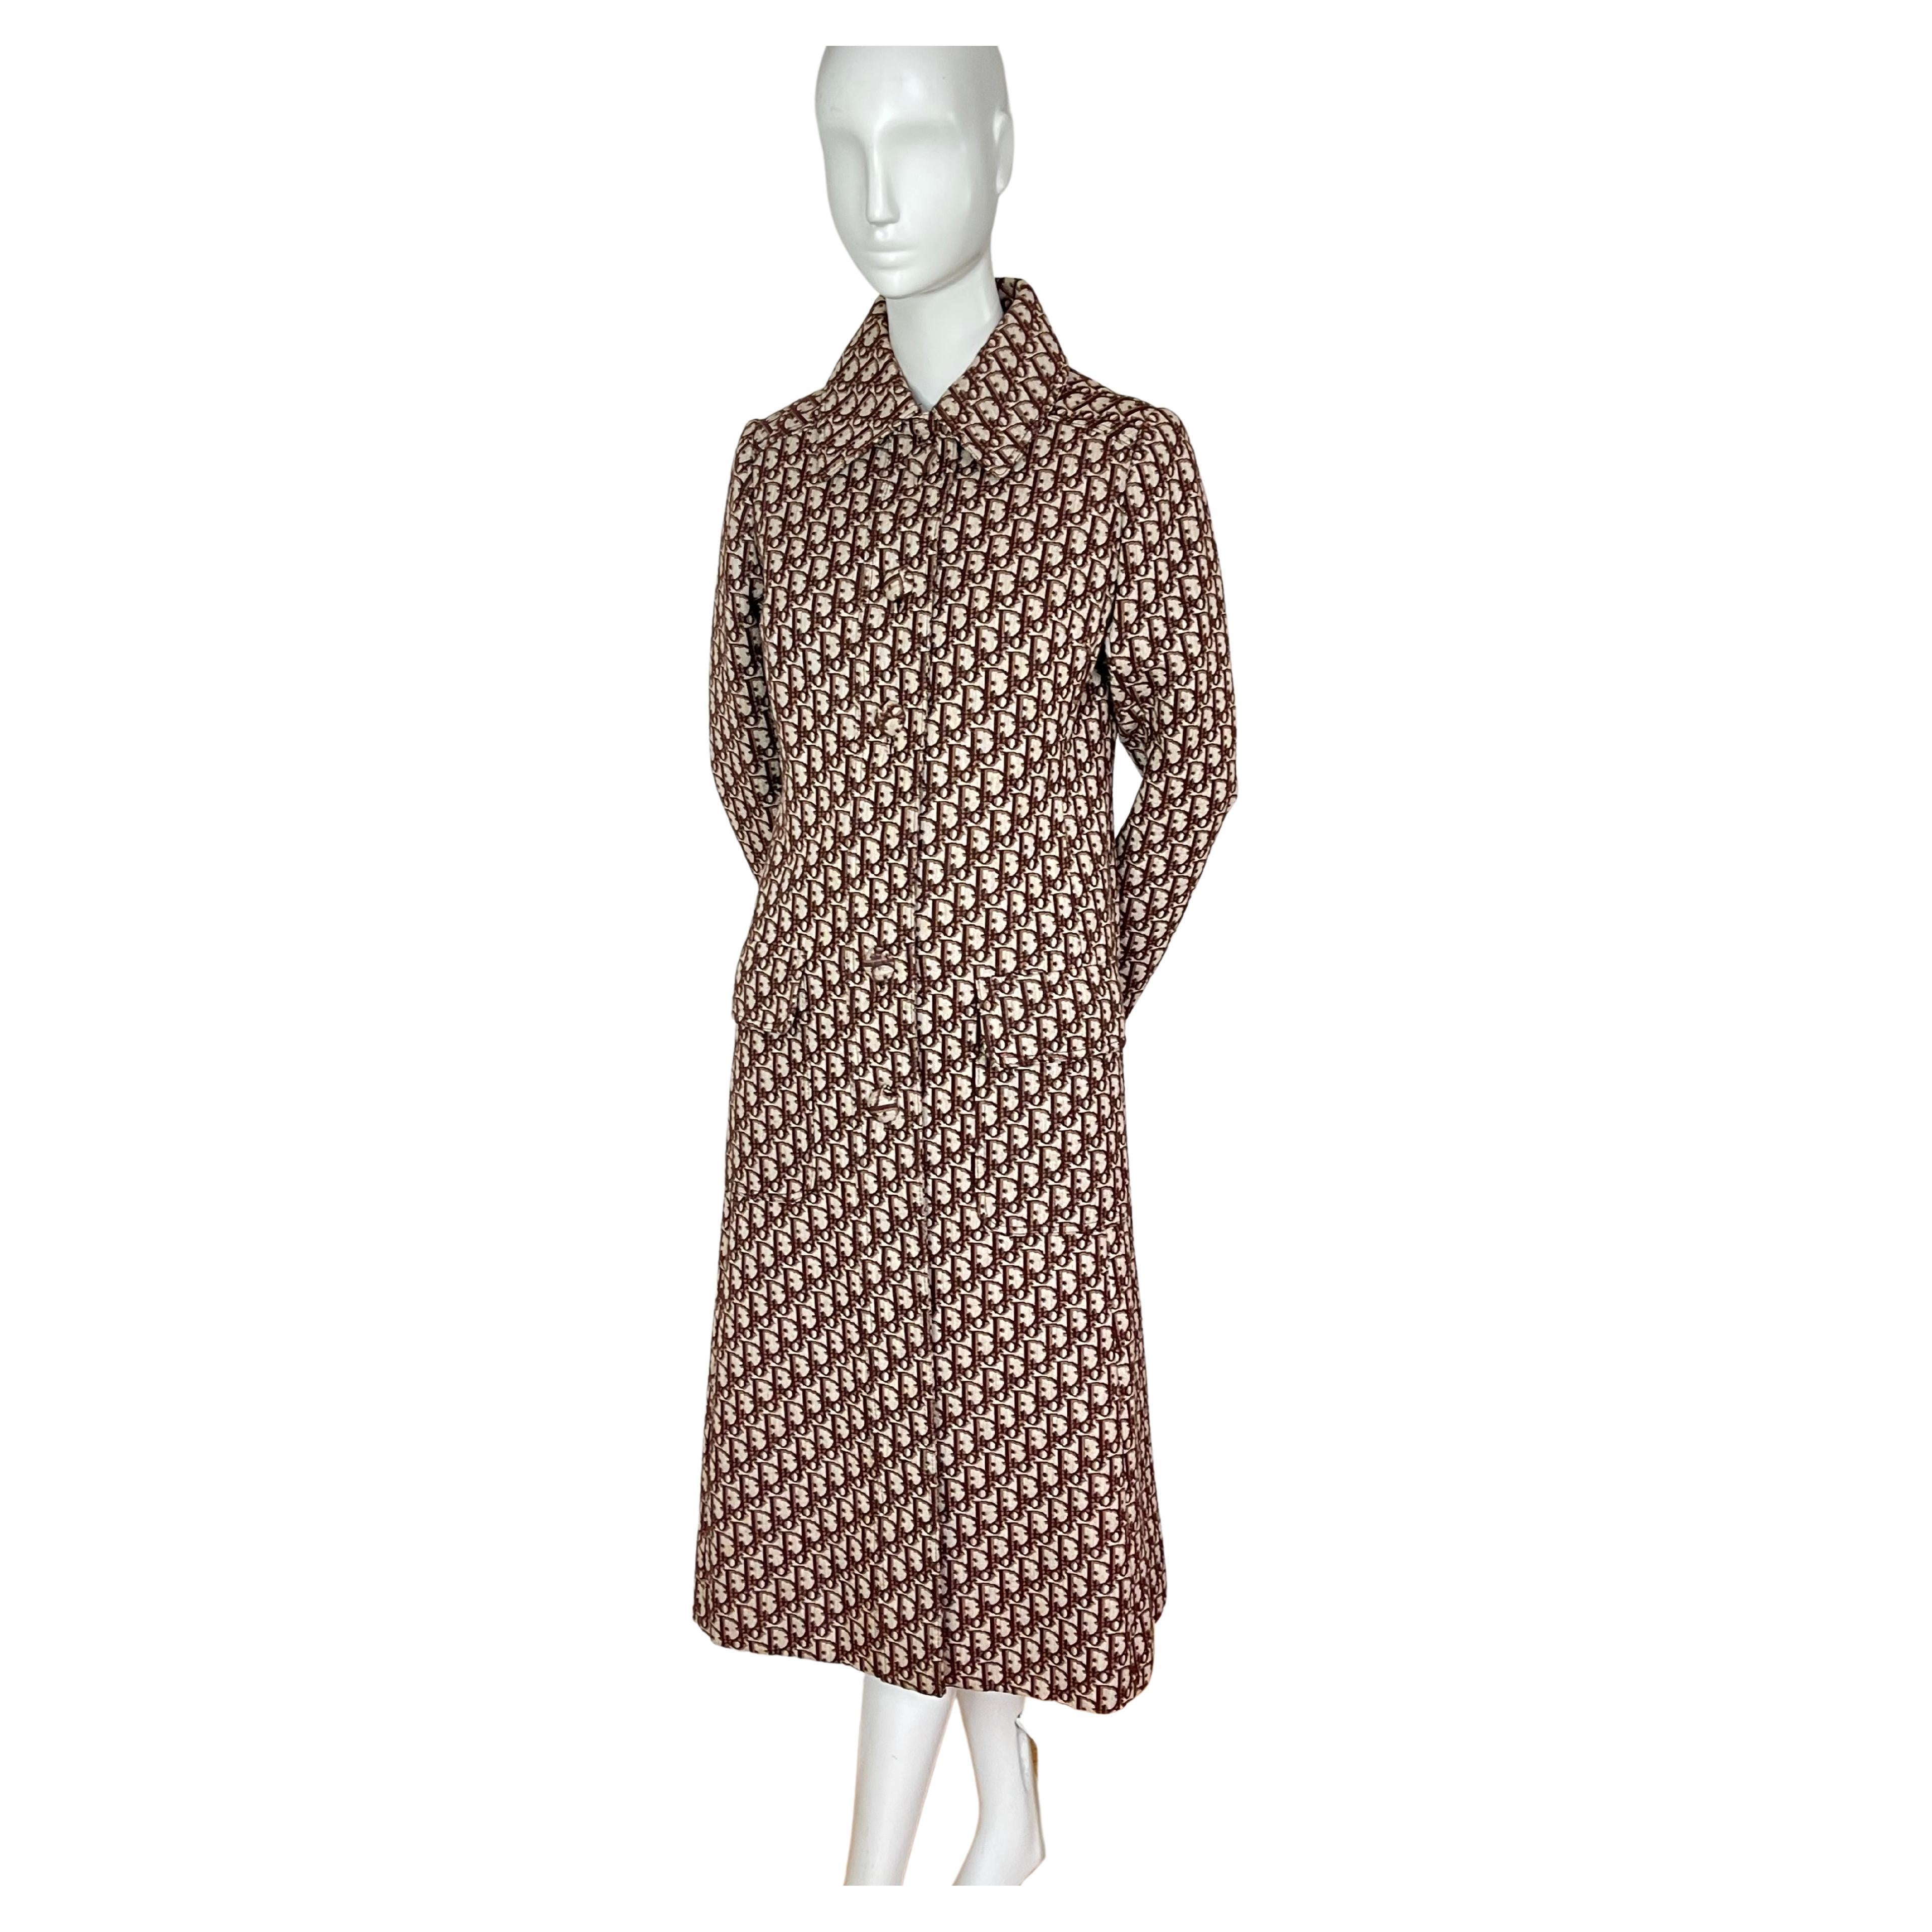 Christian Dior by Marc Bohan 1970's Trotter Logo Print trench coat For Sale